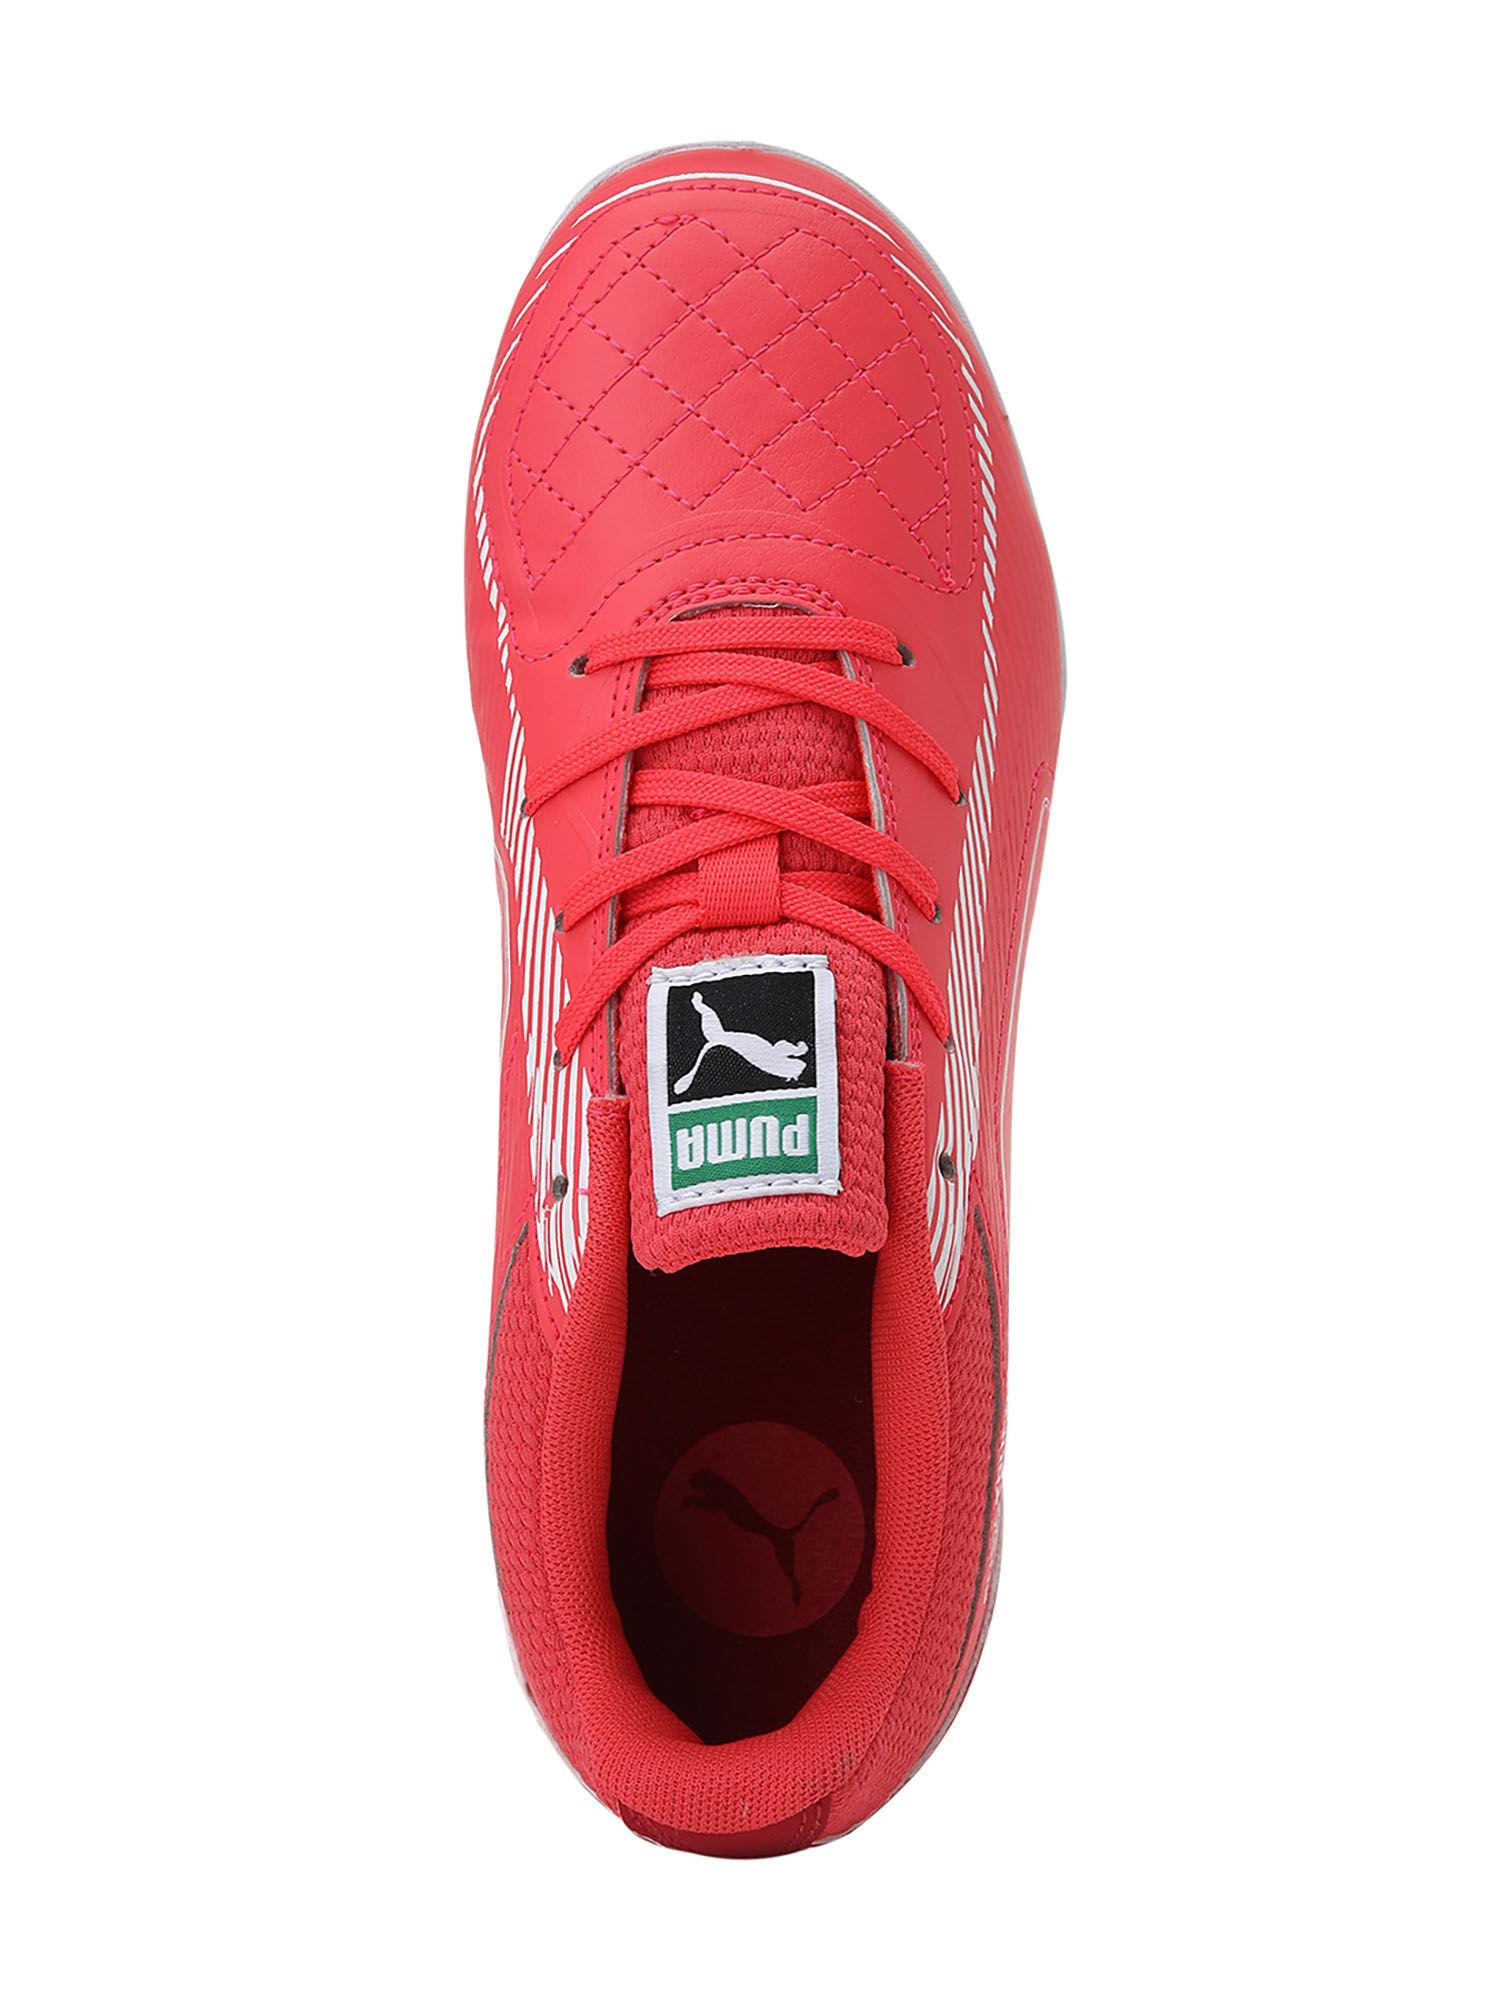 truco ii youth pink football trainers